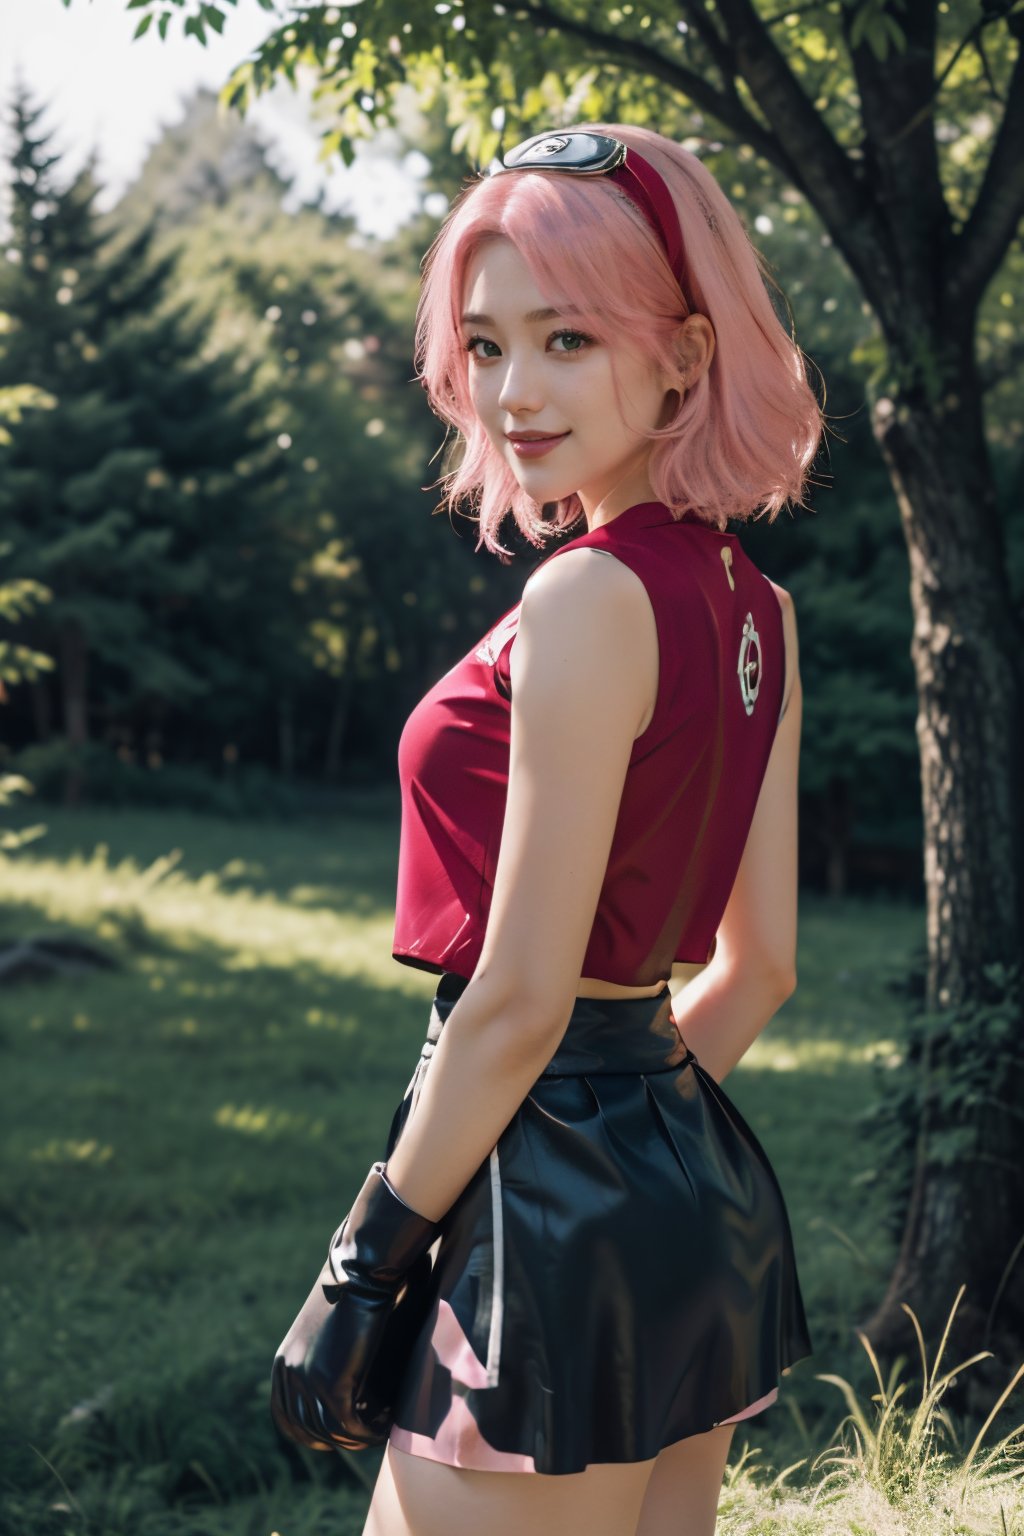 masterpiece, best-quality, photorealistic, raw photo,

1girl, sakura haruno, (green eyes:1.2), hairband, short hair, (pink hair:1.4), (small breast:1.2), bare shoulders, (black gloves:1.2), forehead protector, konohagakure symbol, ninja, (red shirt:1.5), shirt, (sleeveless:1.2), sleeveless shirt, (black short skirt:1.5), (tight shorts:1.2)

looking at viewer, smiling, side view, from side, intense angle, side_view_perspective

japanese old forest, torii, tree, stone, grass, 

backlighting, fog, day lighting, birch light, sun rays, volumetric light